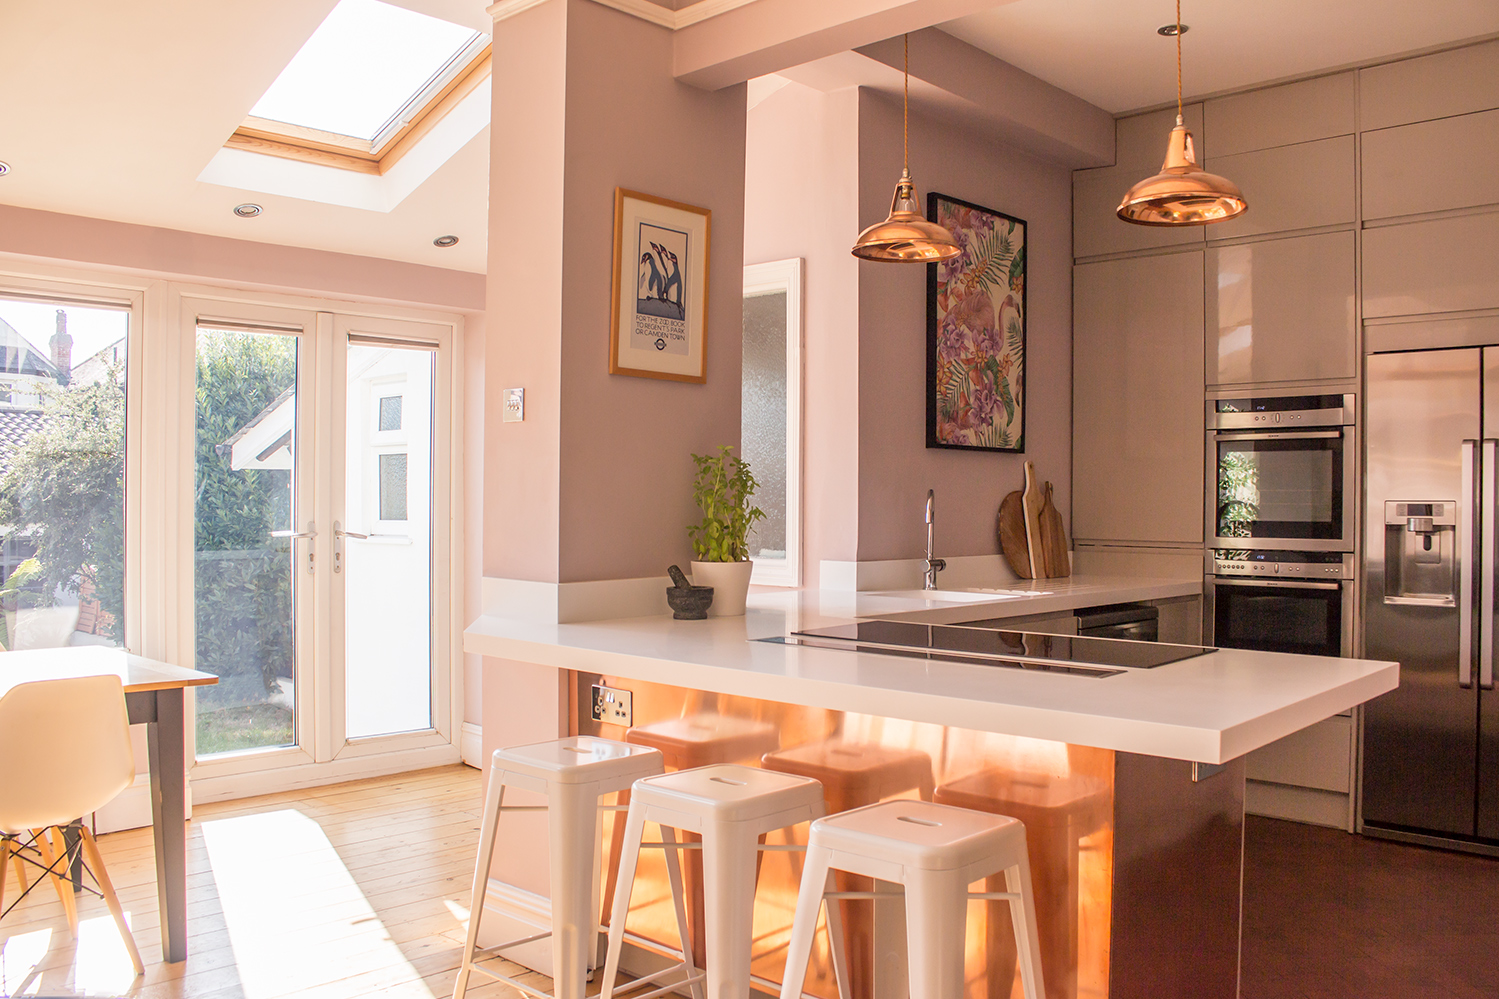 A view of a kitchen I designed, with copper lighting over the breakfast bar and copper around the units.